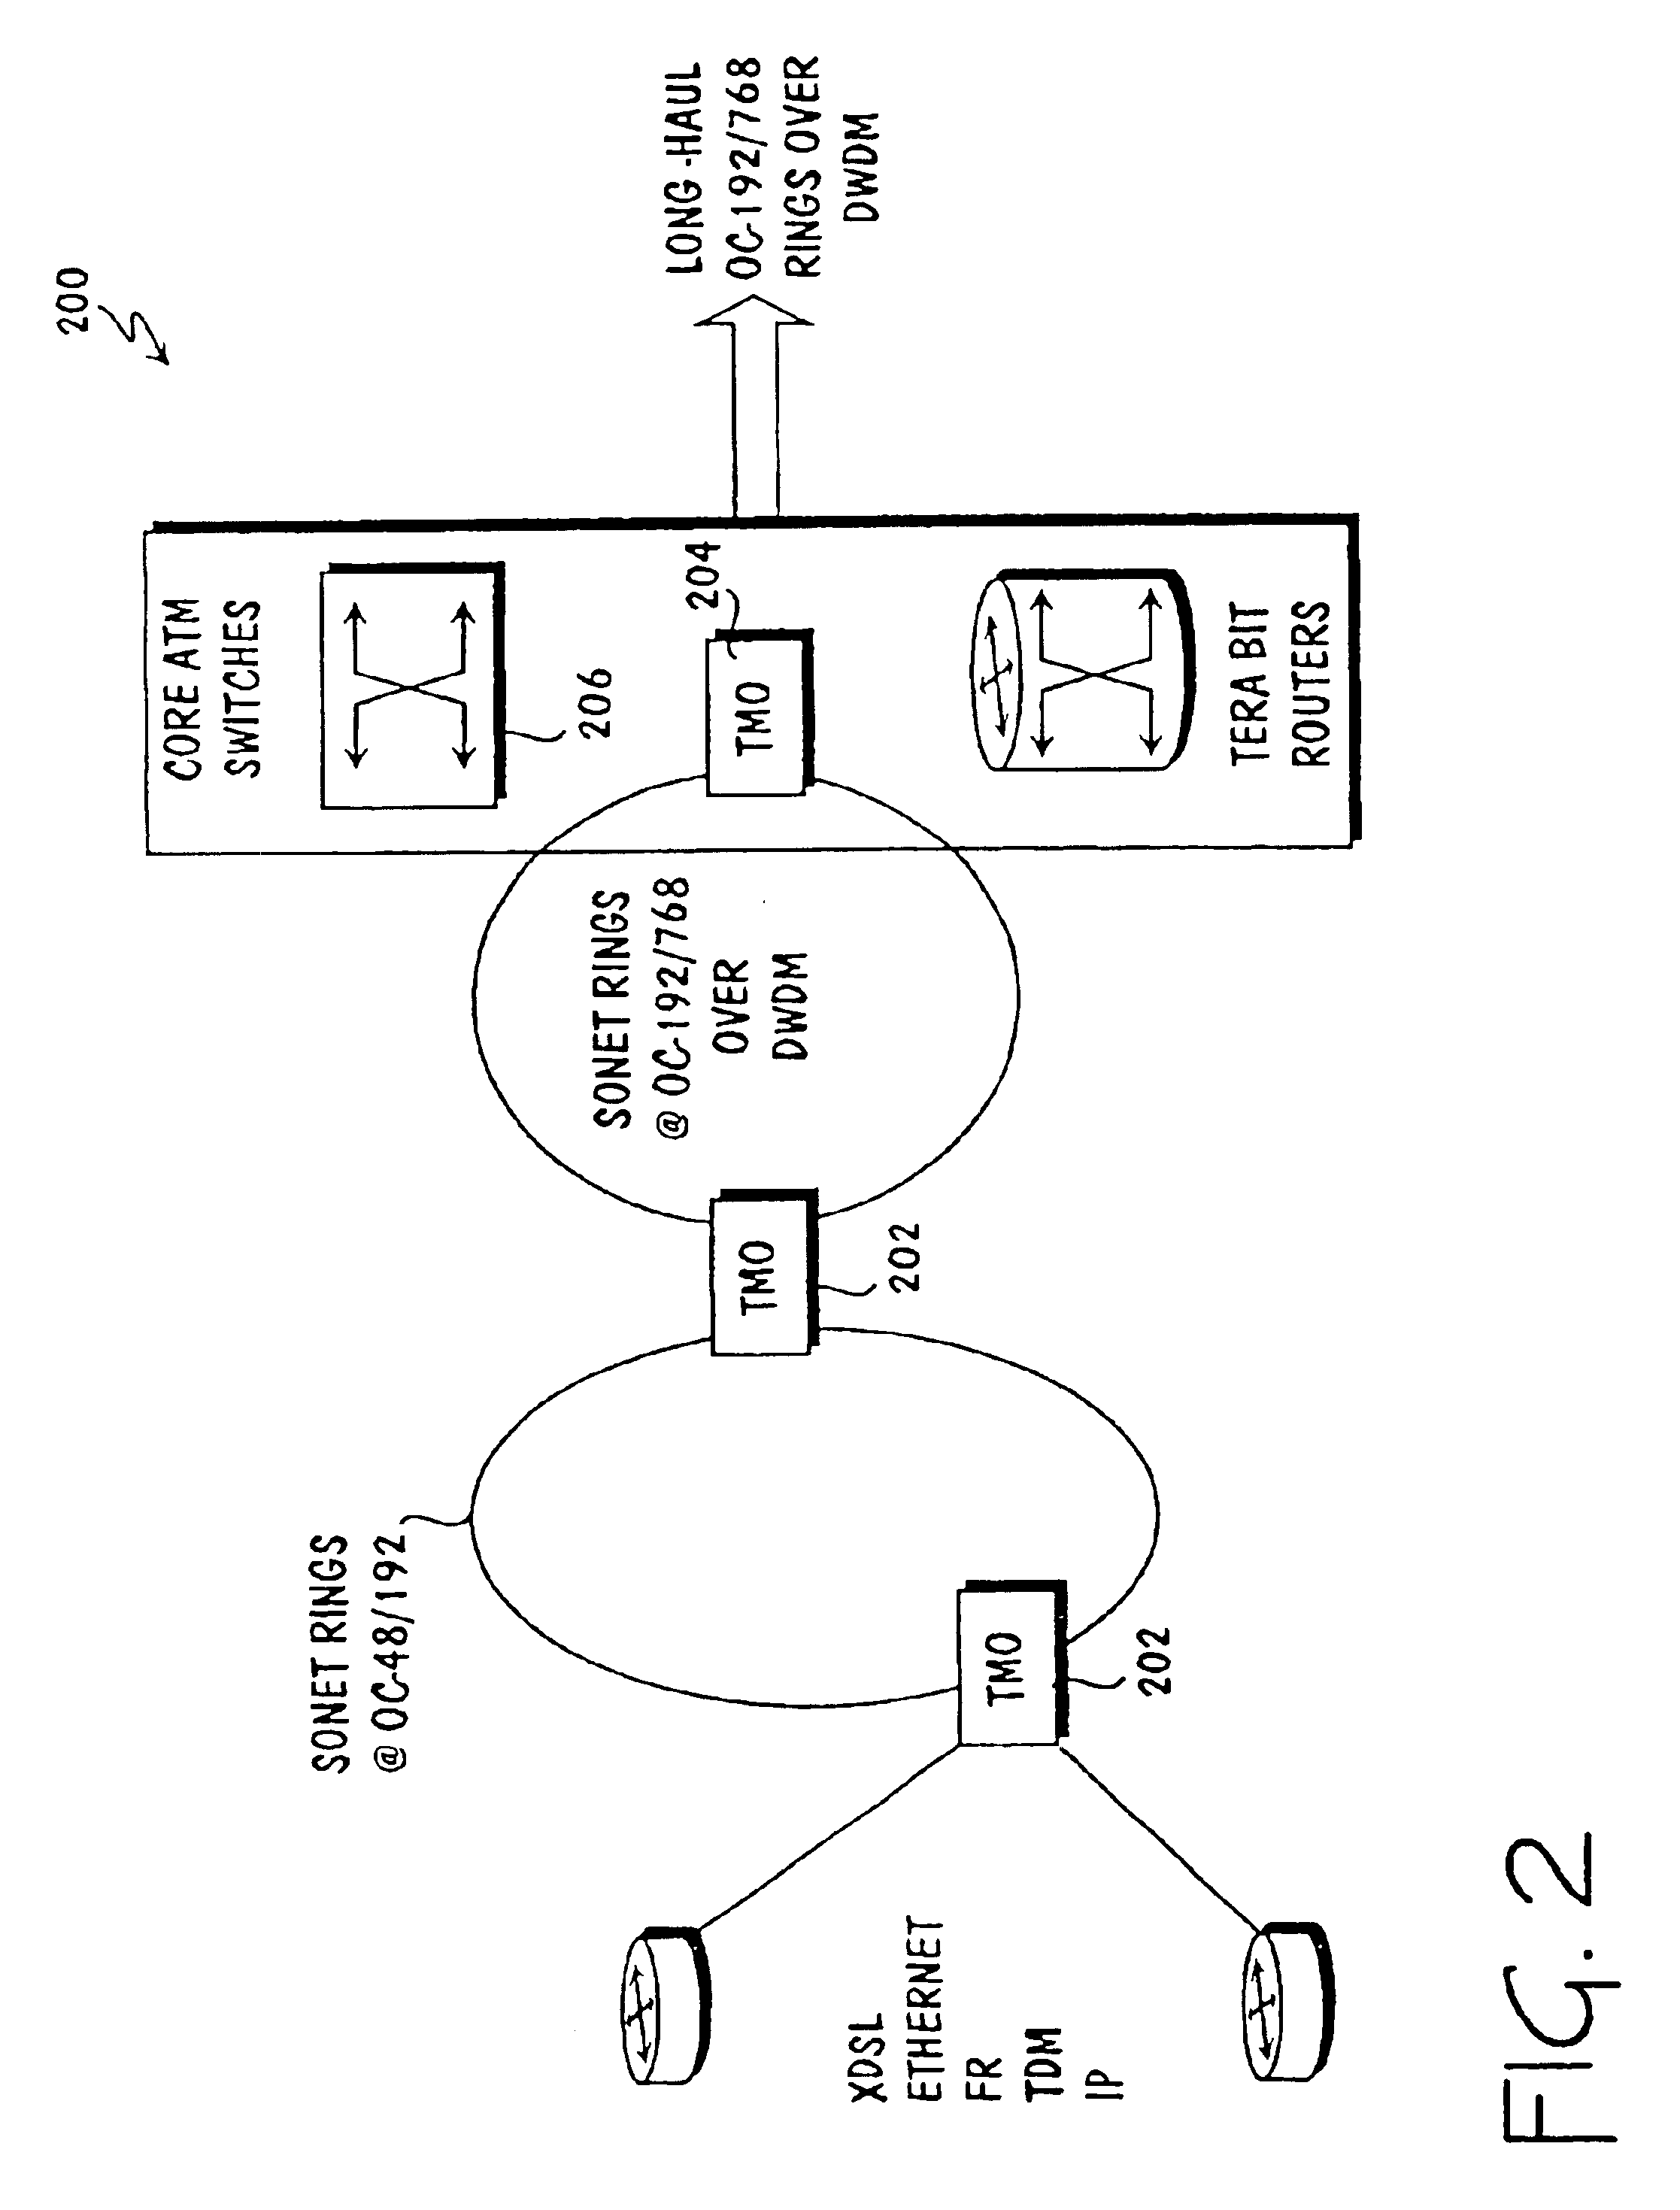 Method for routing network switching information